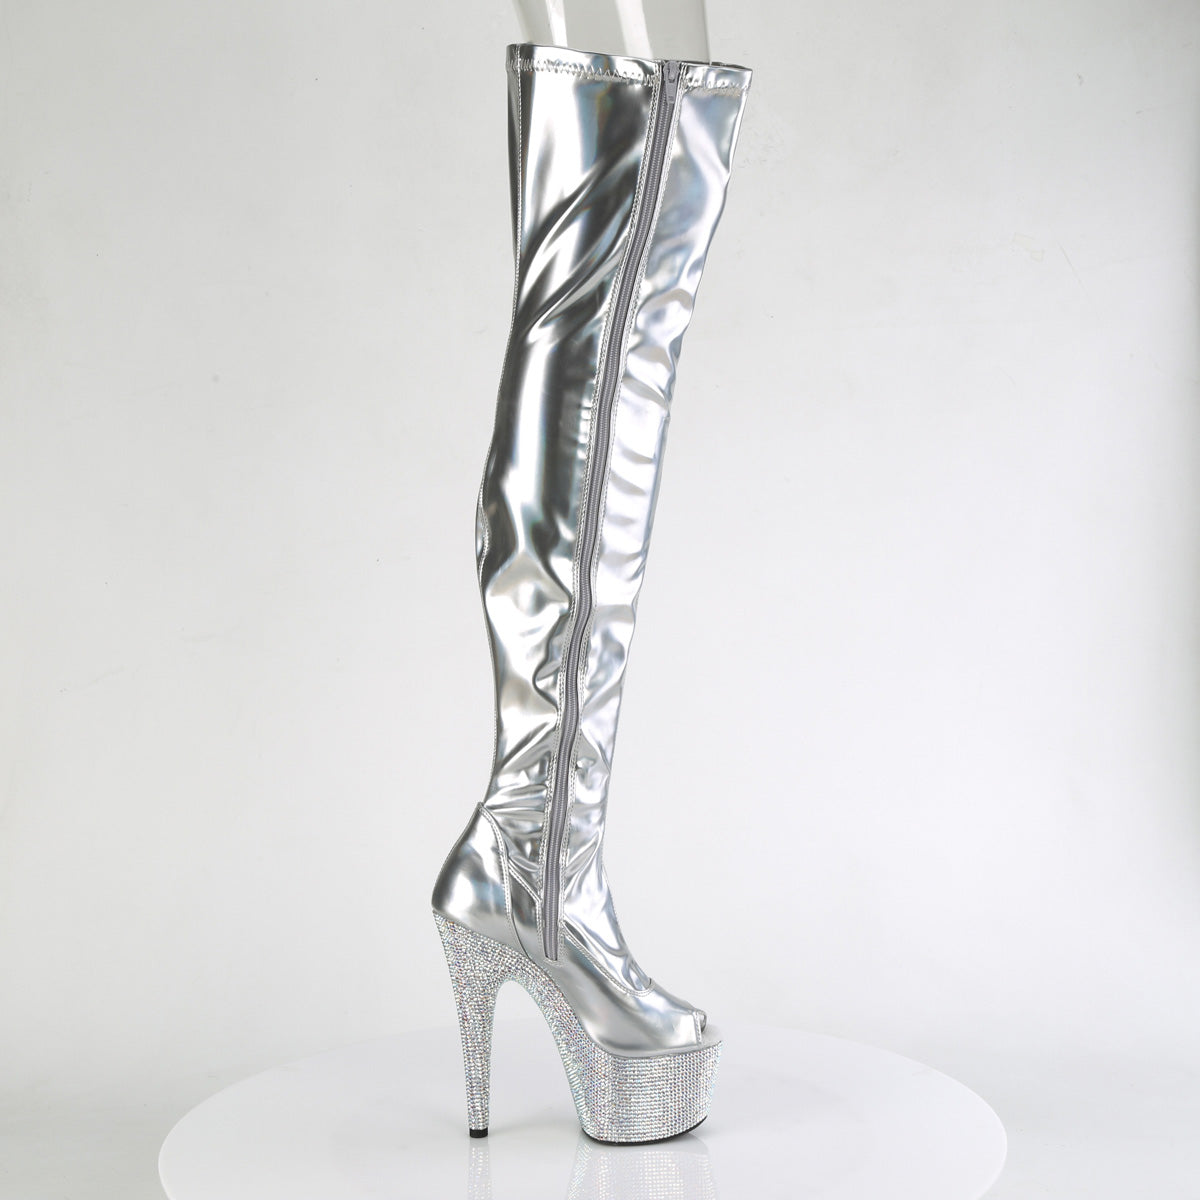 BEJEWELED-3011-7 Pleaser Silver Stretch Holo Patent/Silver AB Rhinestones Platform Shoes [Sexy Thigh High Boots]